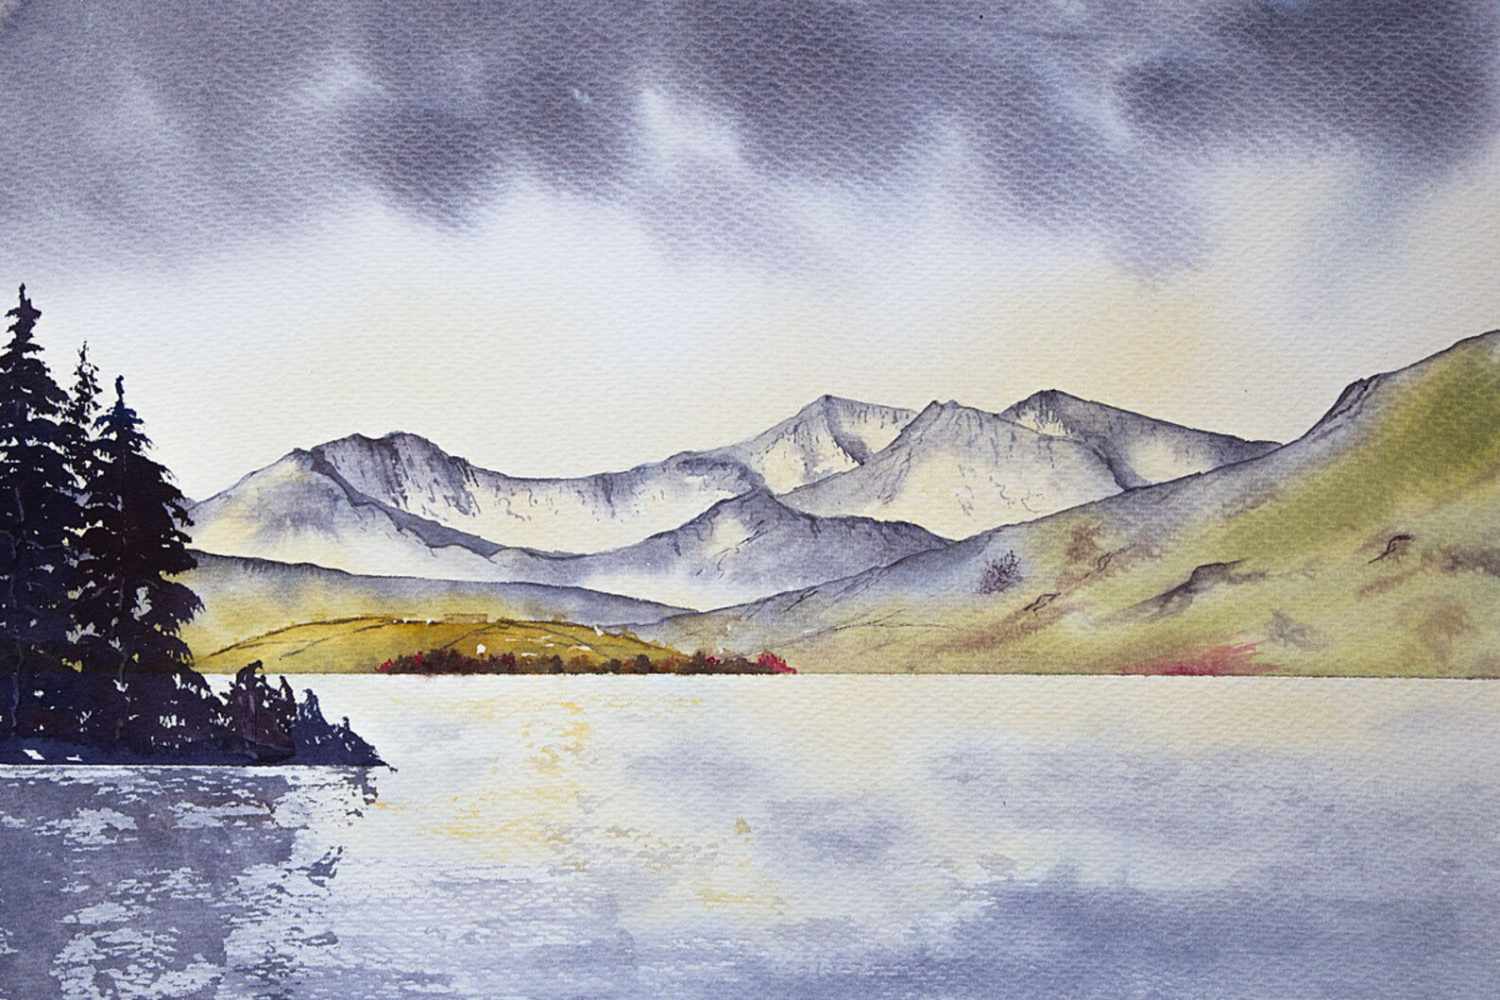 Snowdon Horseshoe (Yr Wyddfa) in Watercolours, original painting for sale